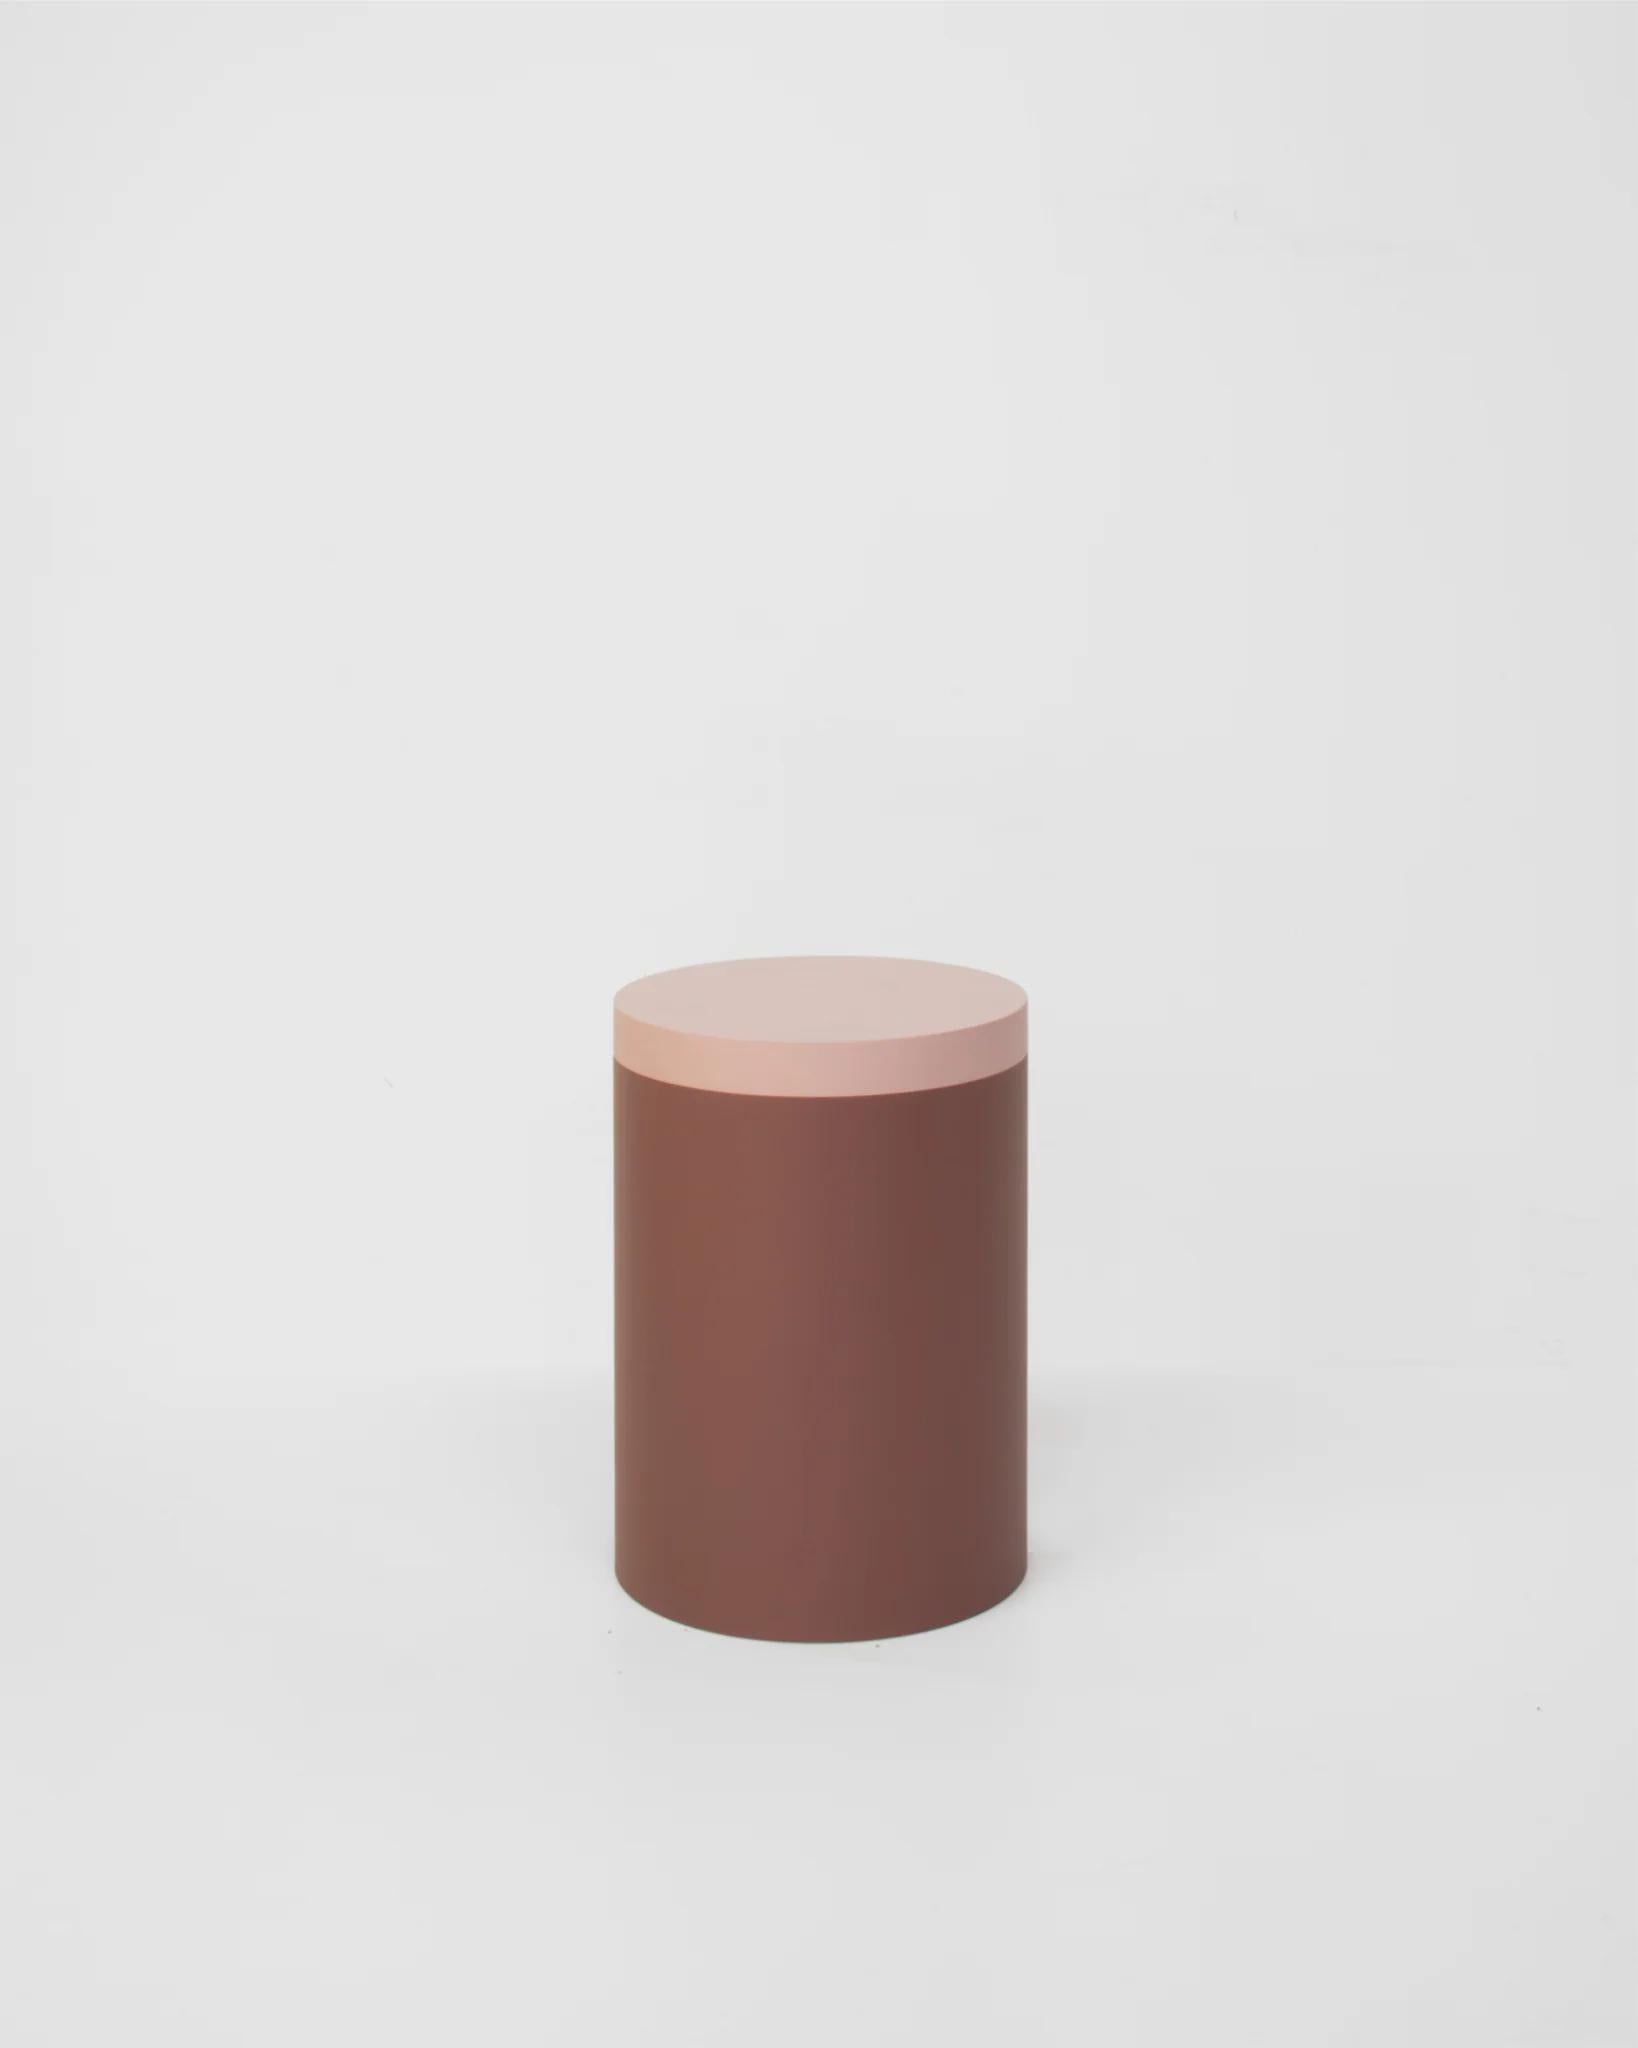 Colourful stool with a contemporary design.
Manufactured in an artisanal way, in which every step of the process is carefully executed. The base of this stool consists of varying numbers of hollow cylinders. It's topped with a slab surface for